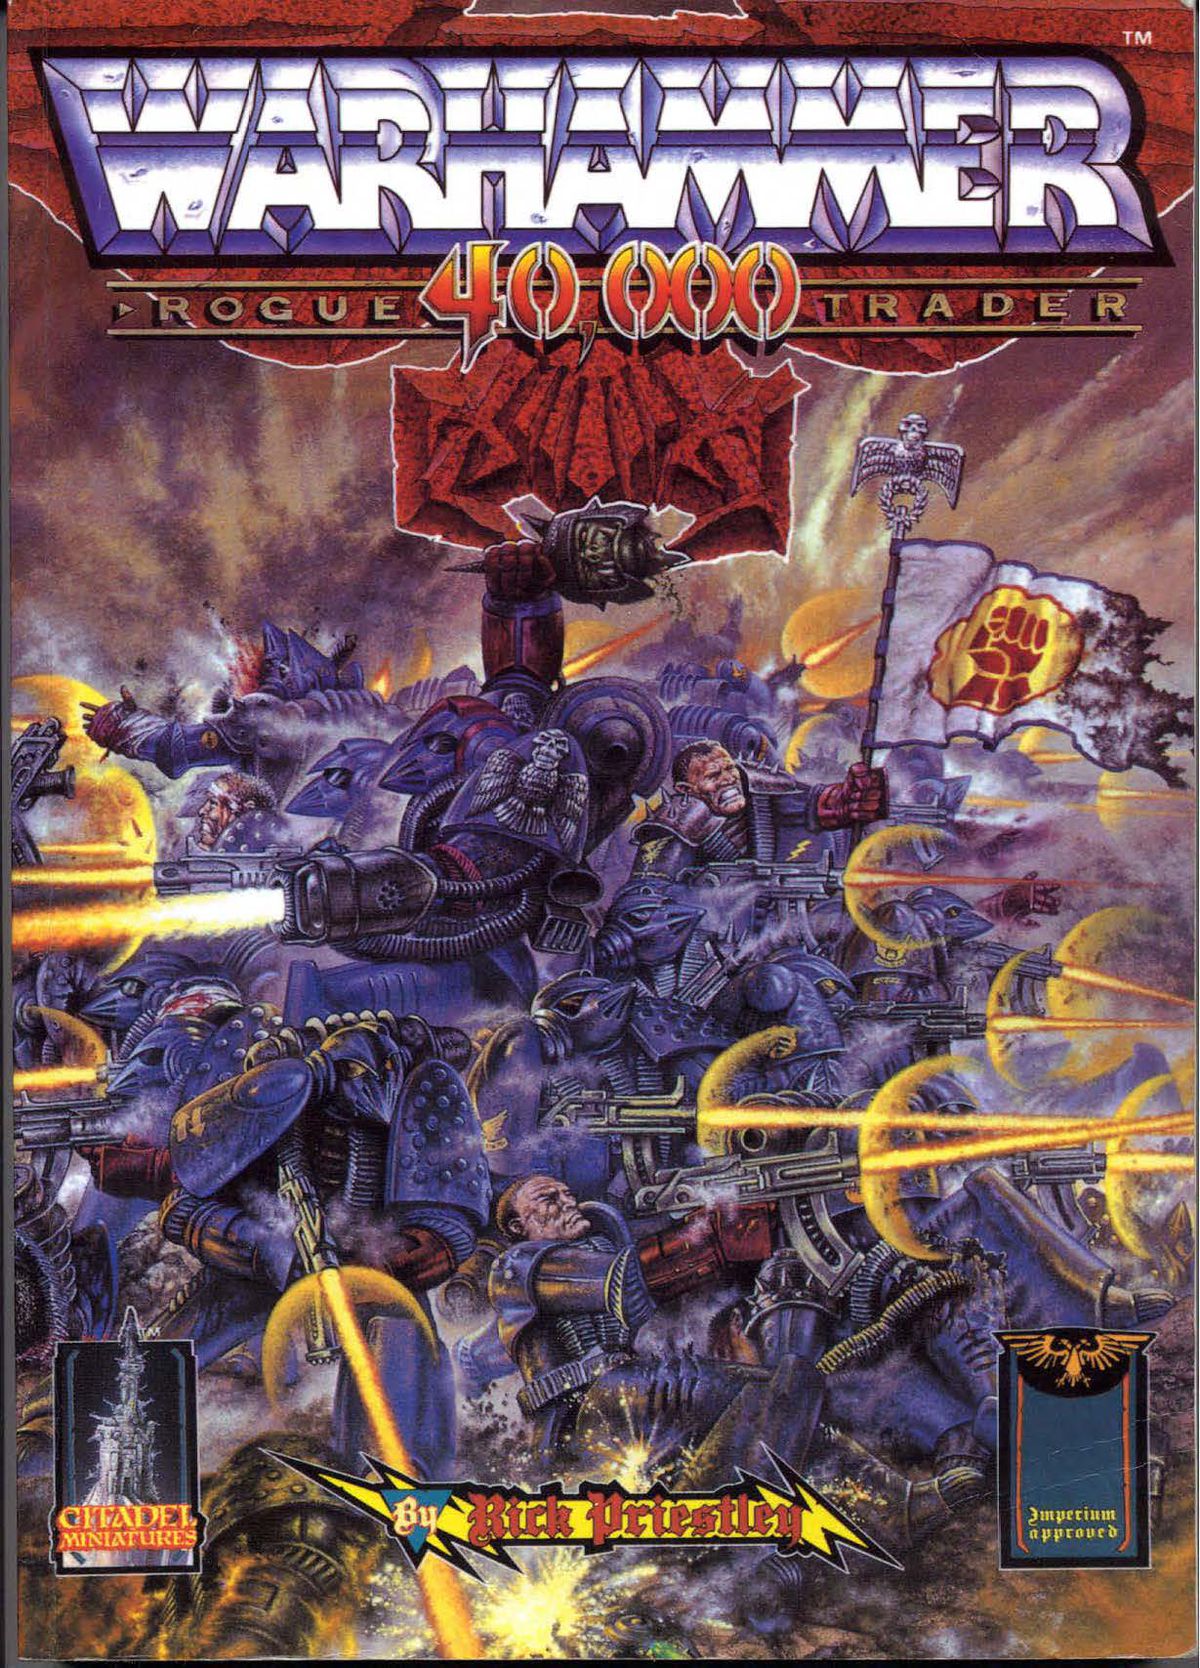 Cover for the original Warhammer 40,000 rulebook, released in 1987. Its formal title is Rogue Trader: Warhammer 40,000.